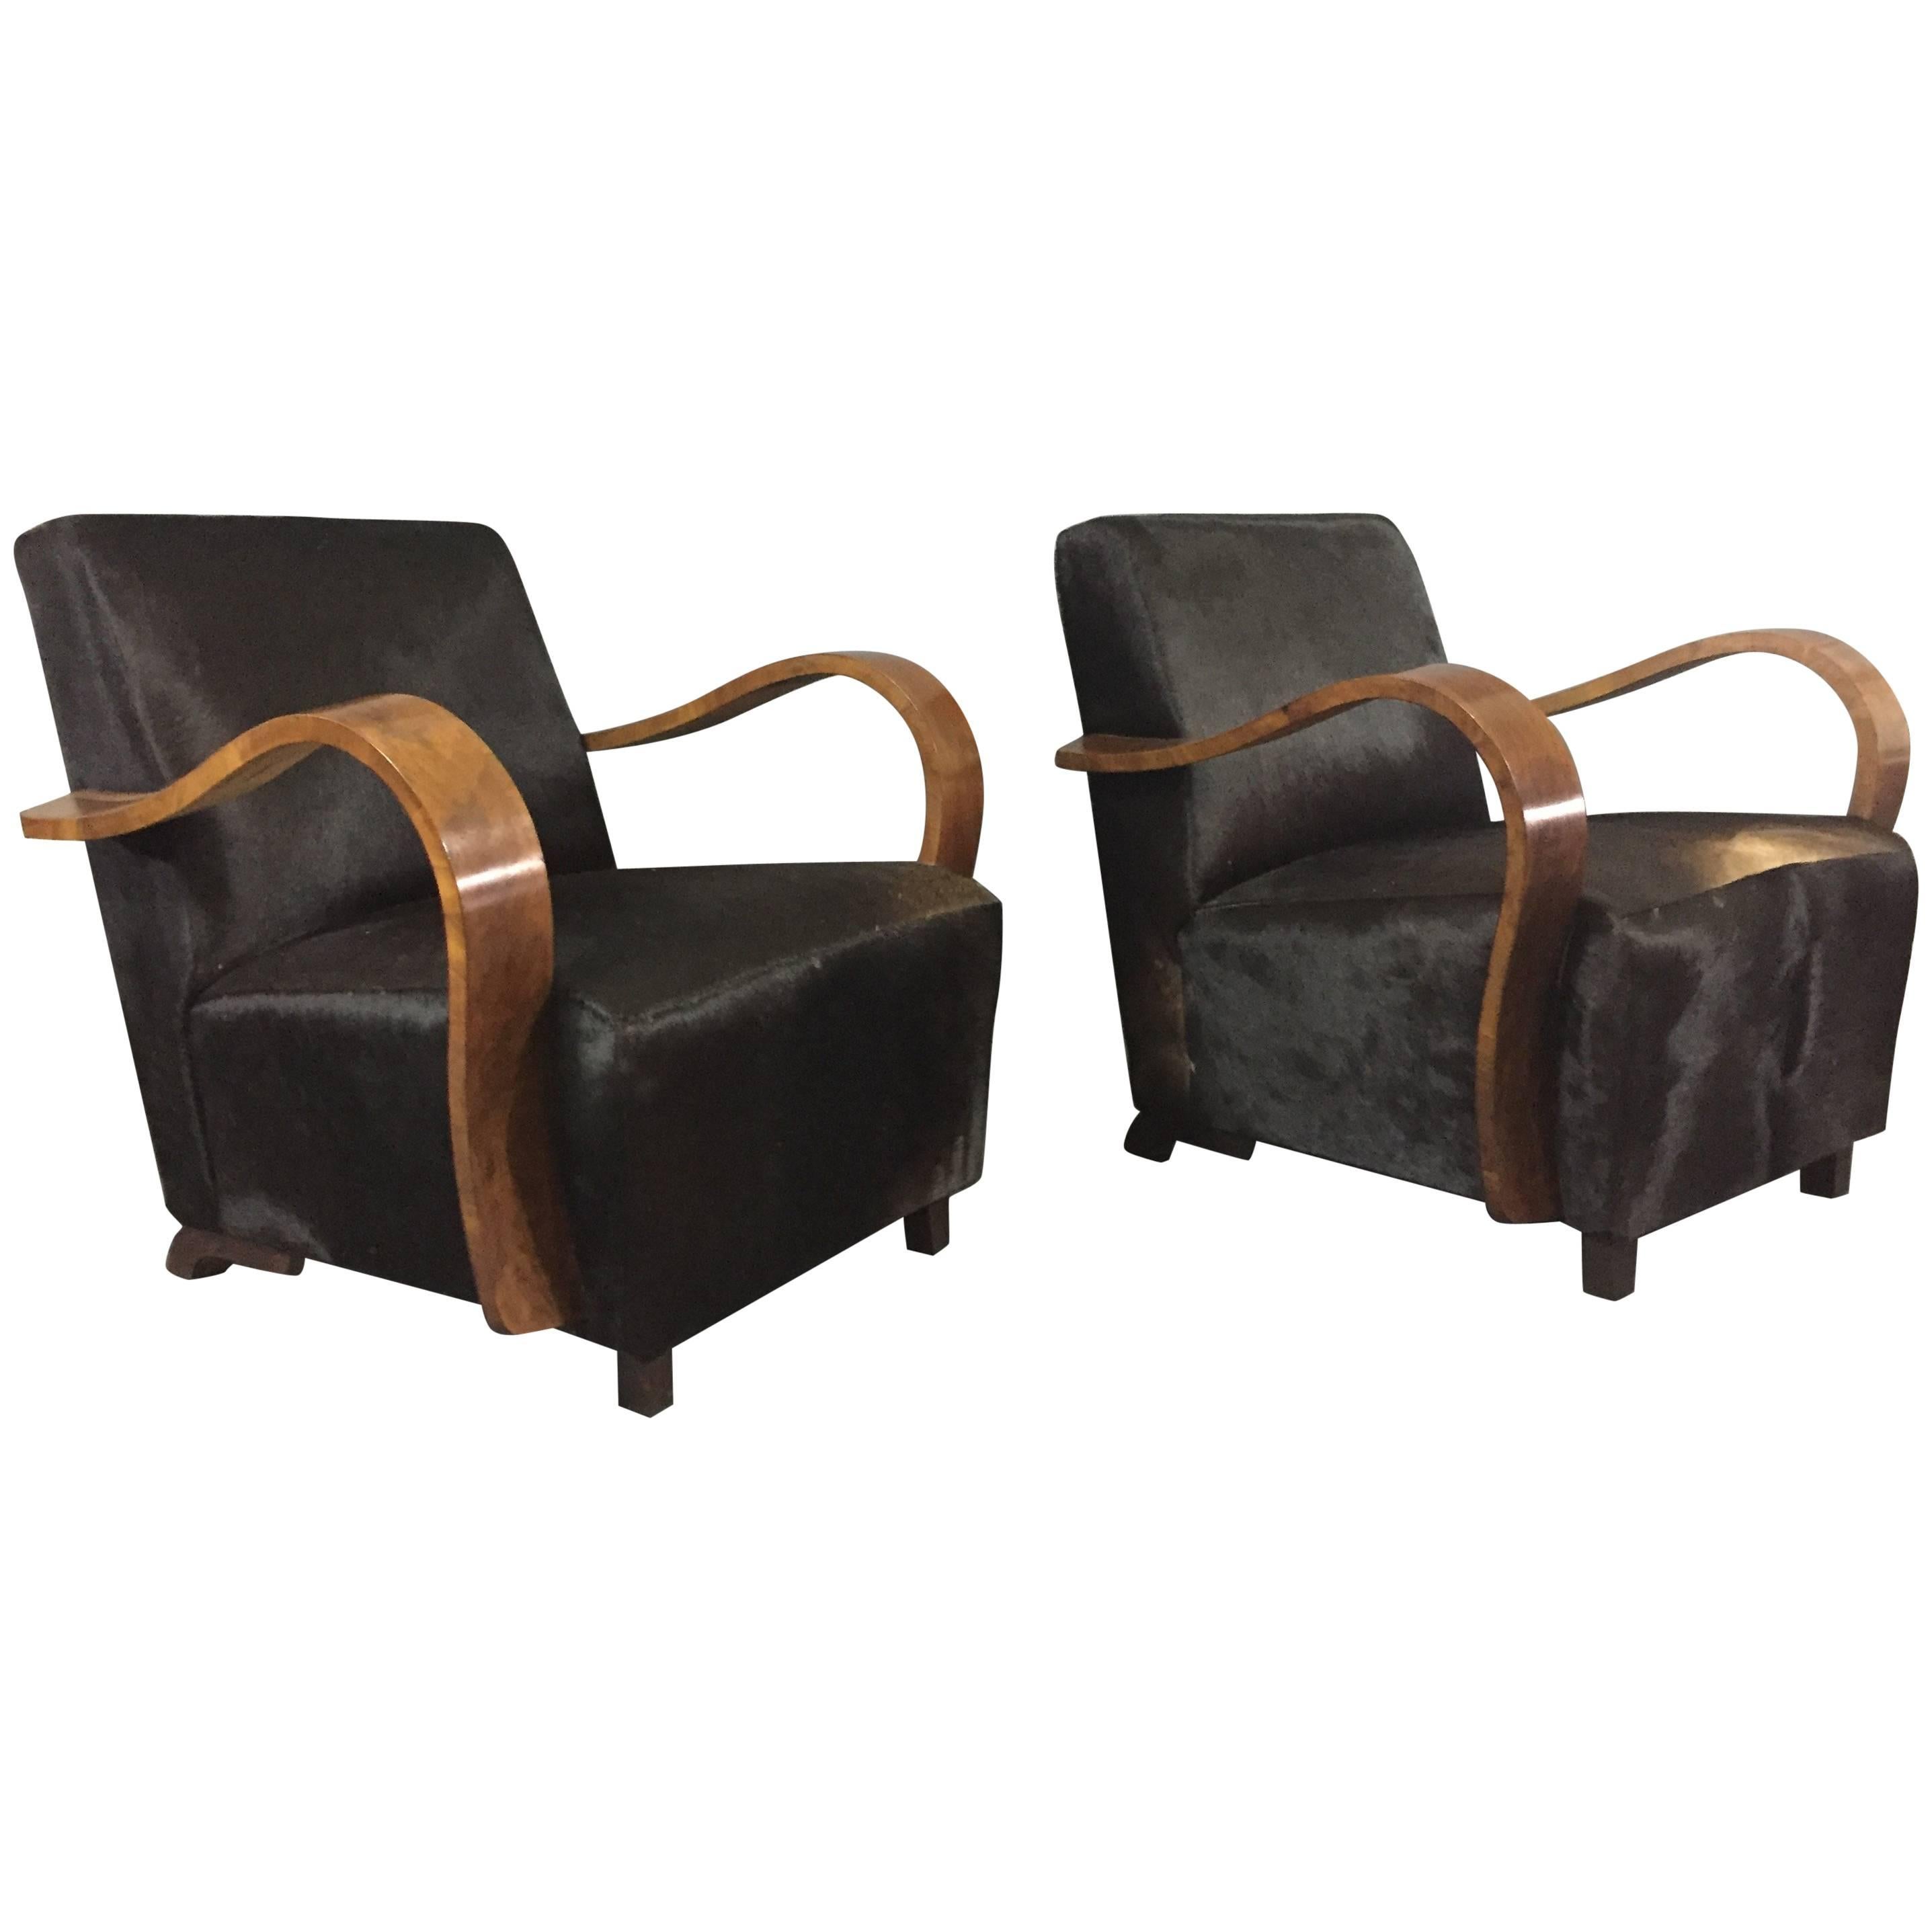 Pair of 1930s Austrian Art Deco Lounge Chairs, Black Hide Covers For Sale